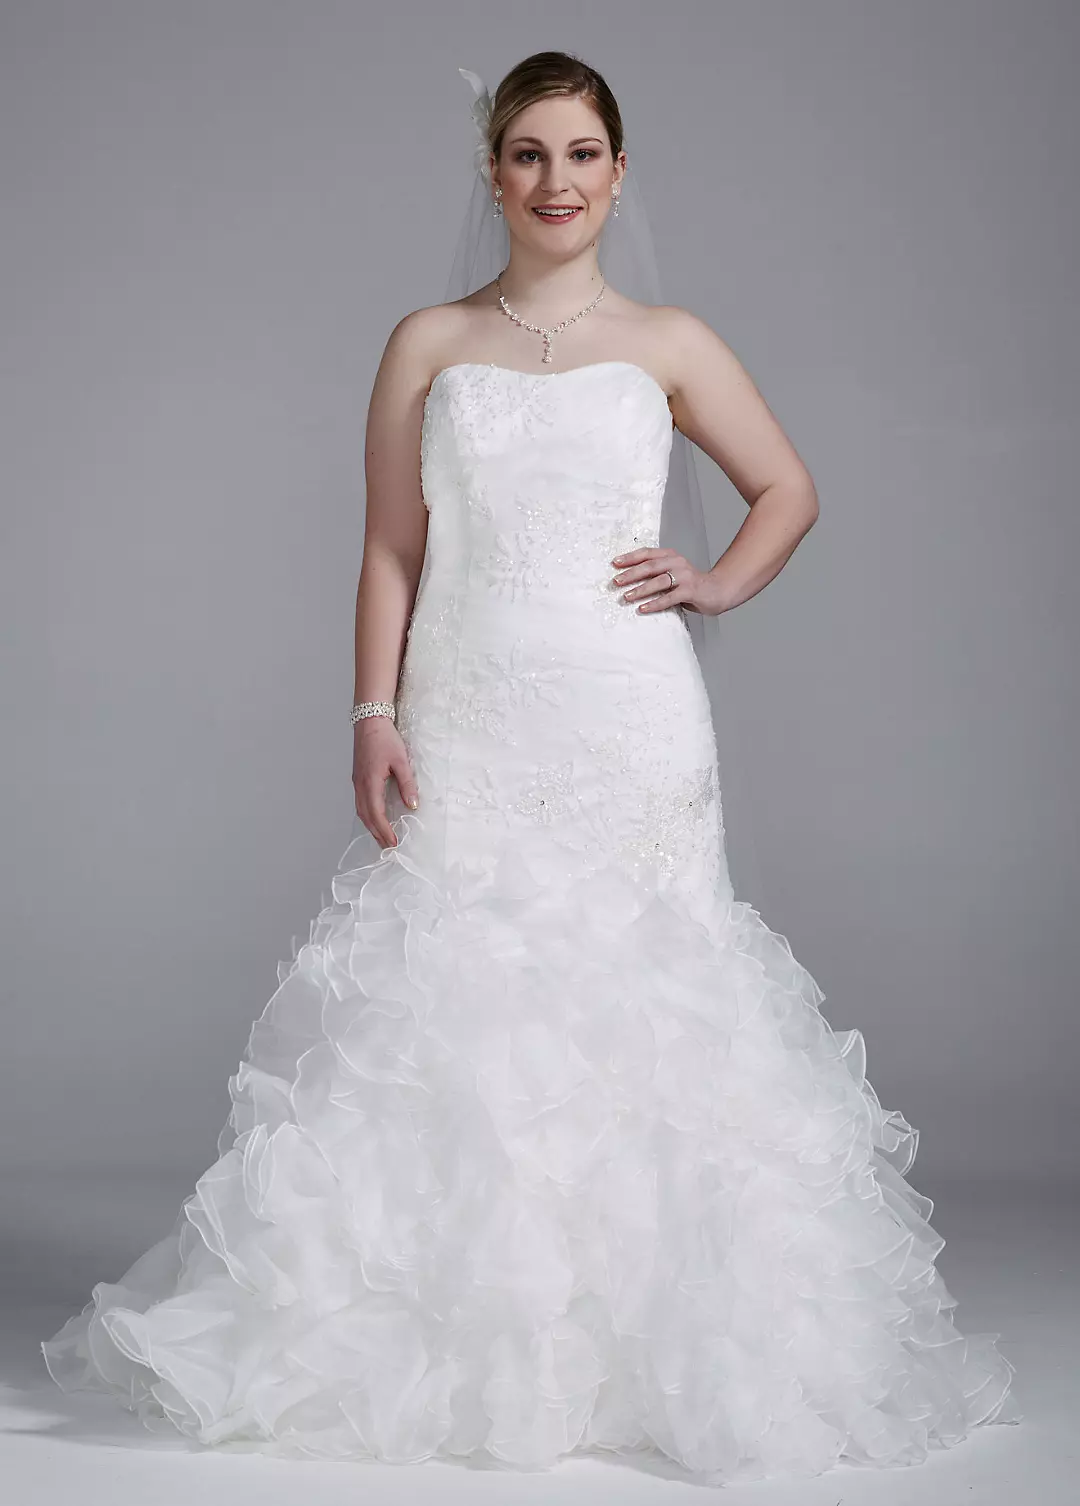 Wedding Gown with Lace Appliques and Ruffled Skirt Image